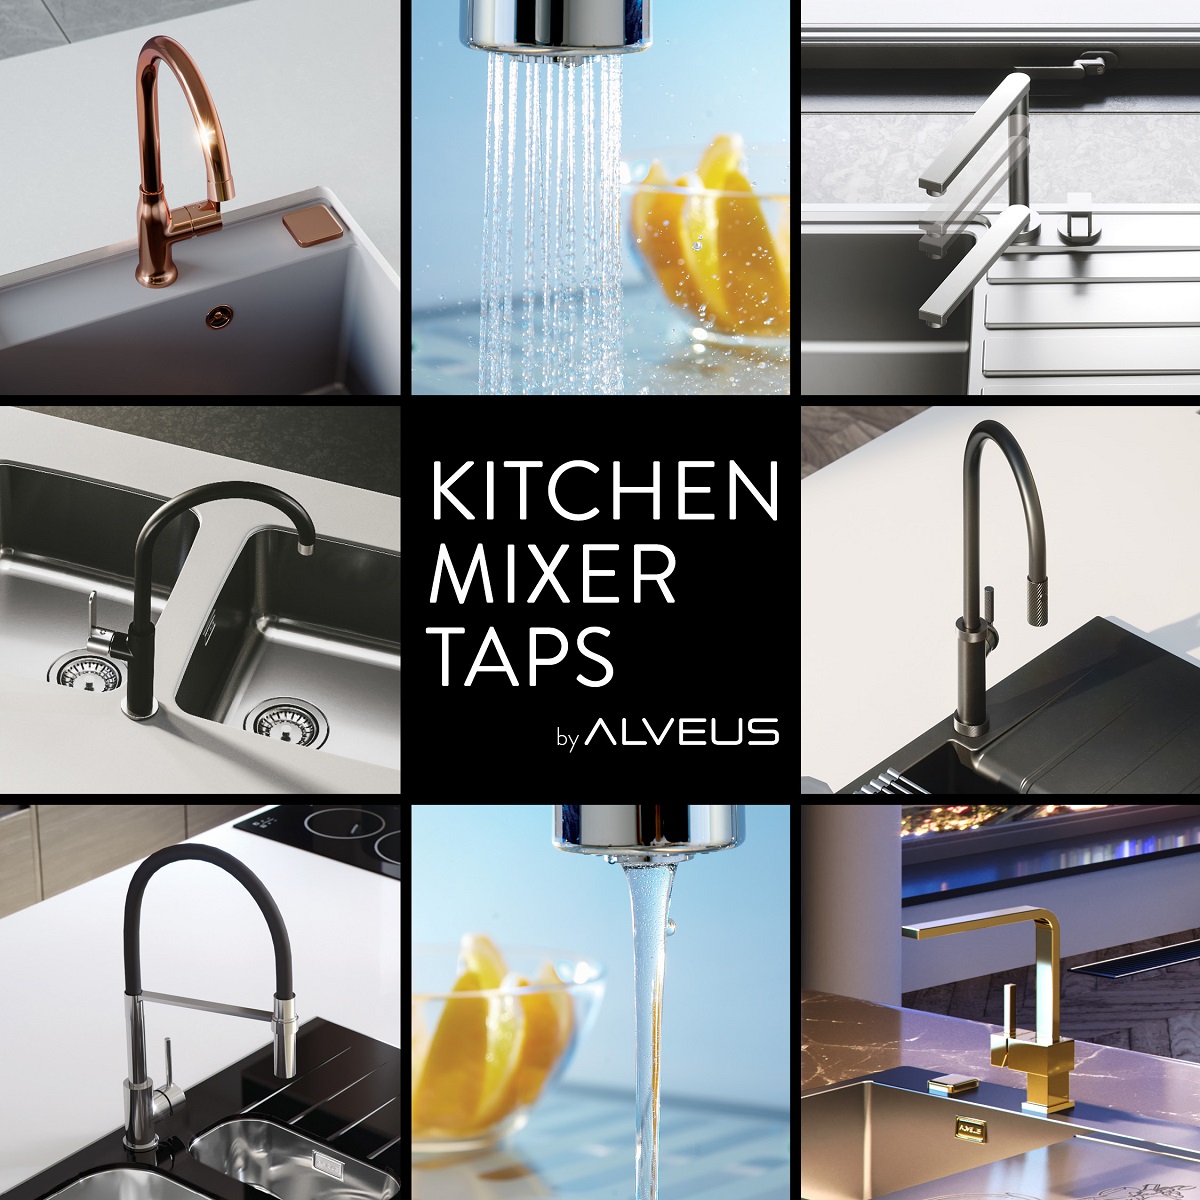 Kitchen tap: How to choose the right one?